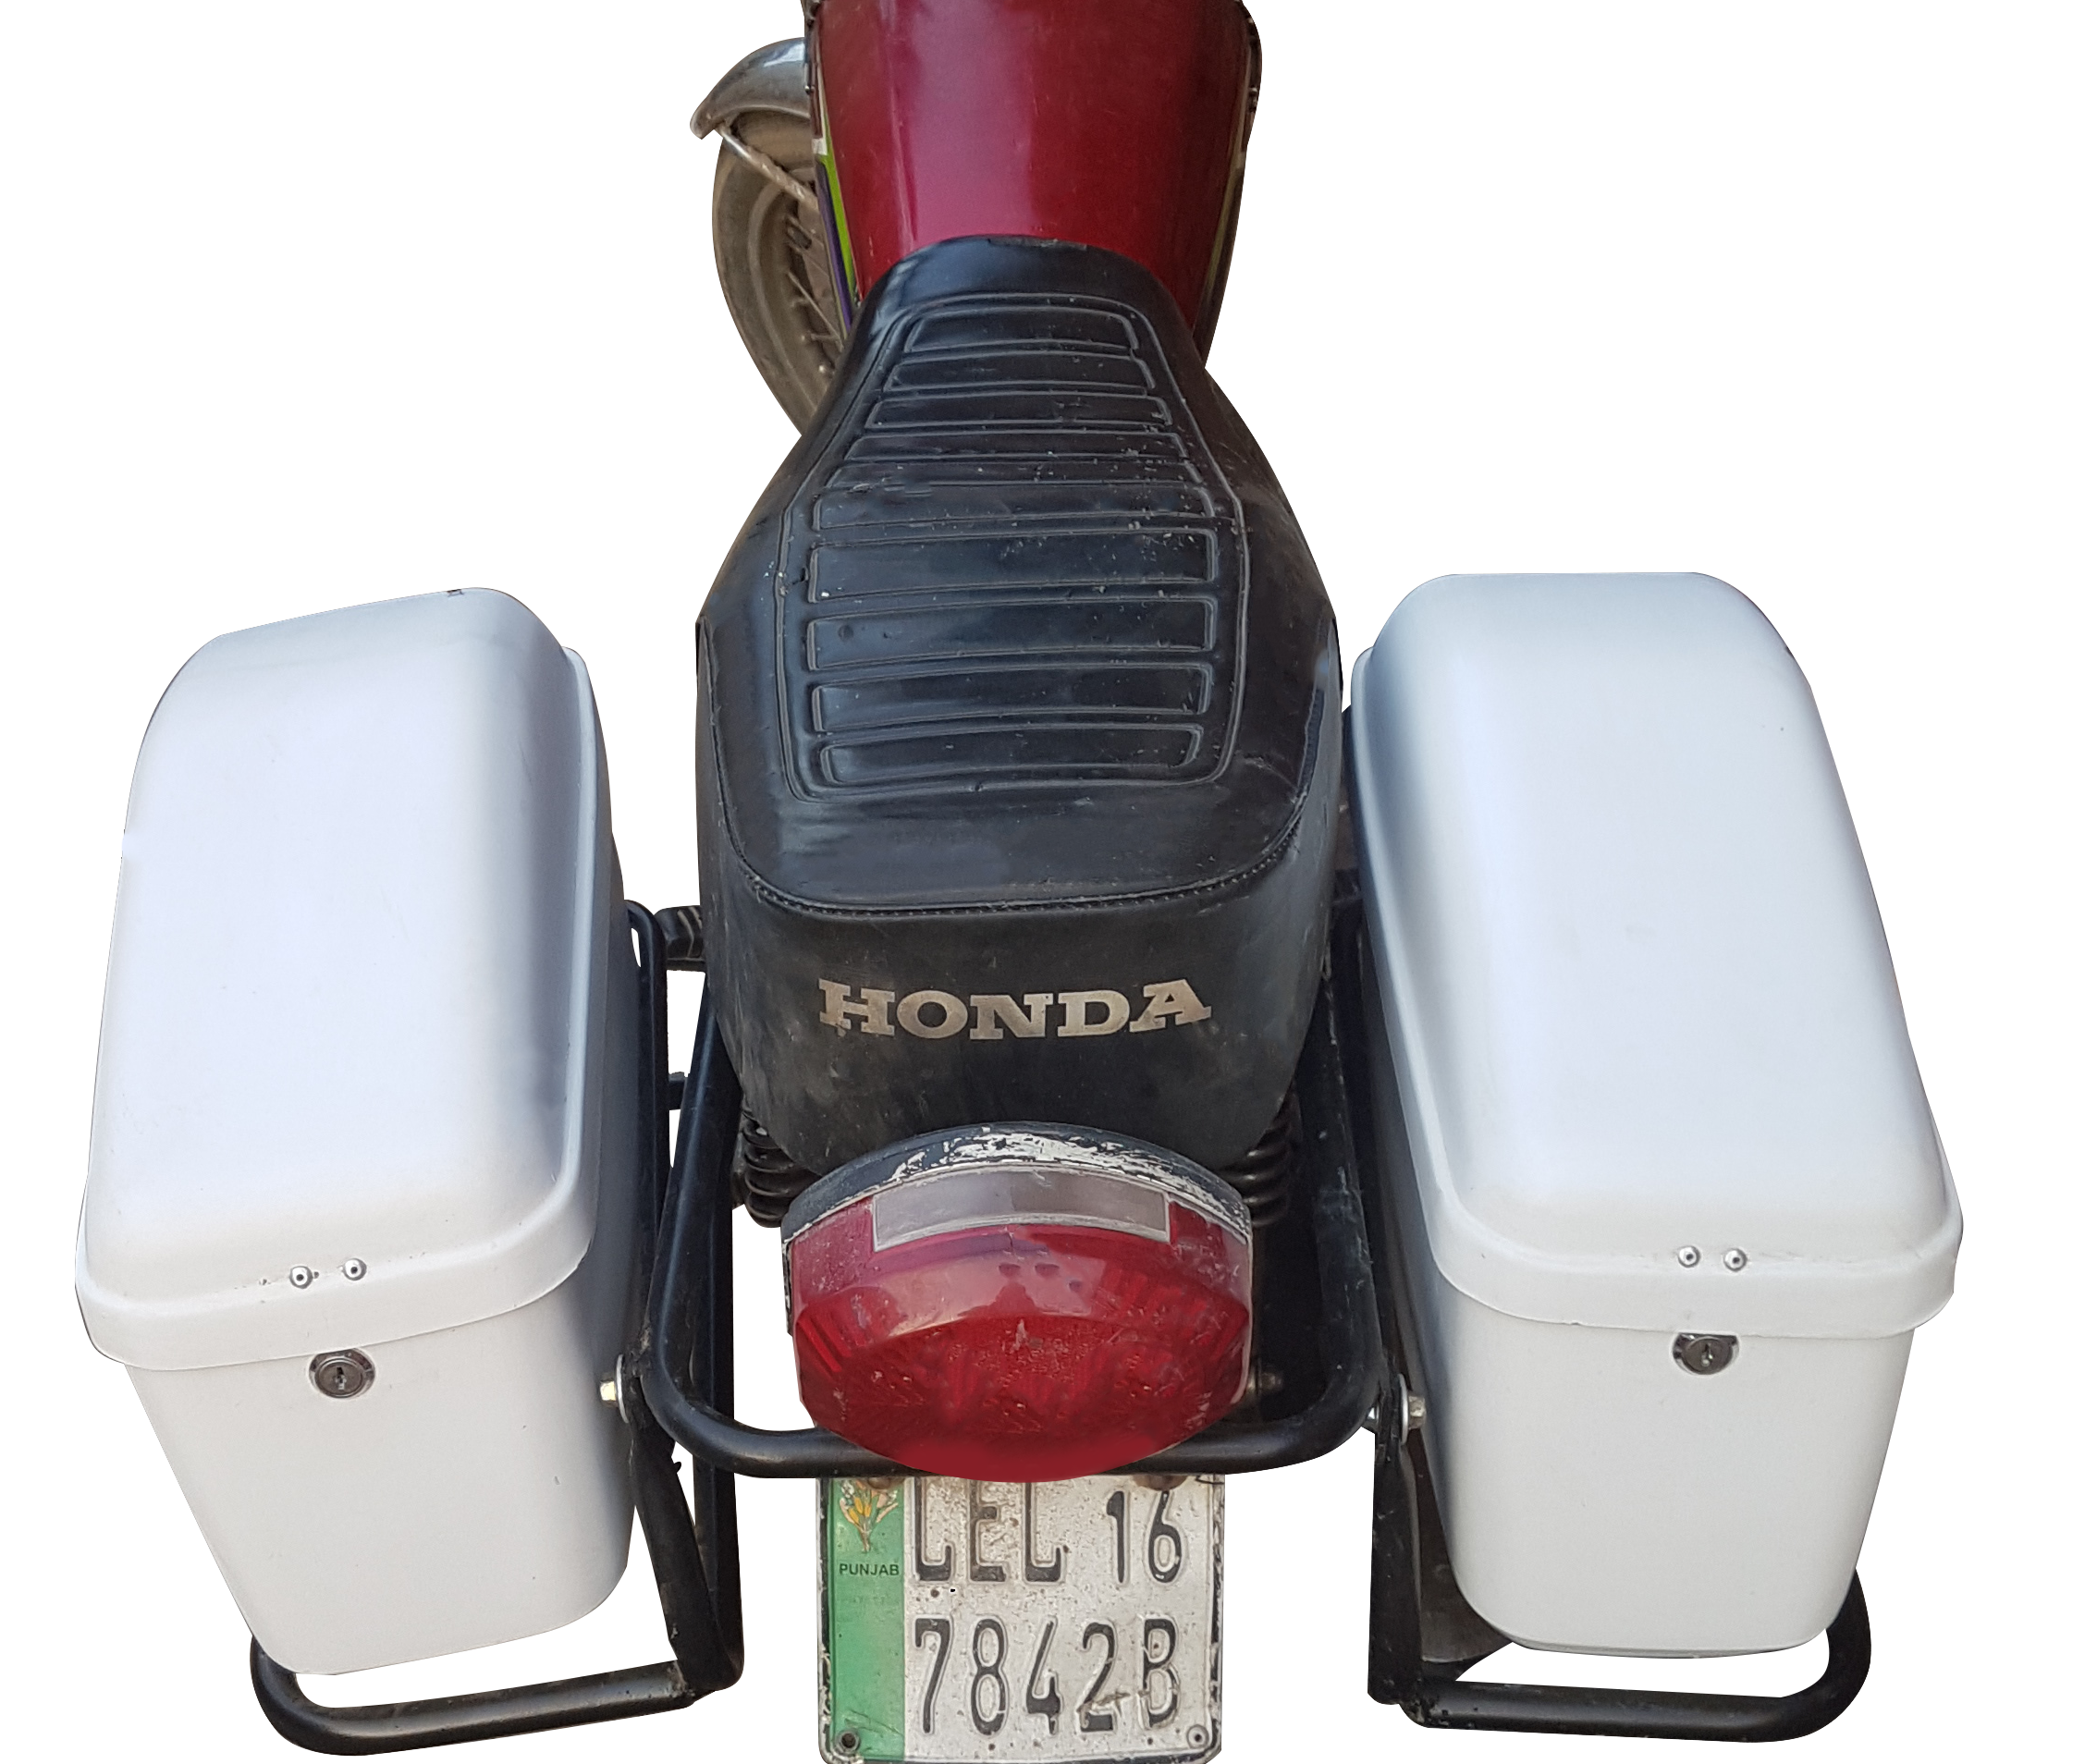 Motor cycle side boxes